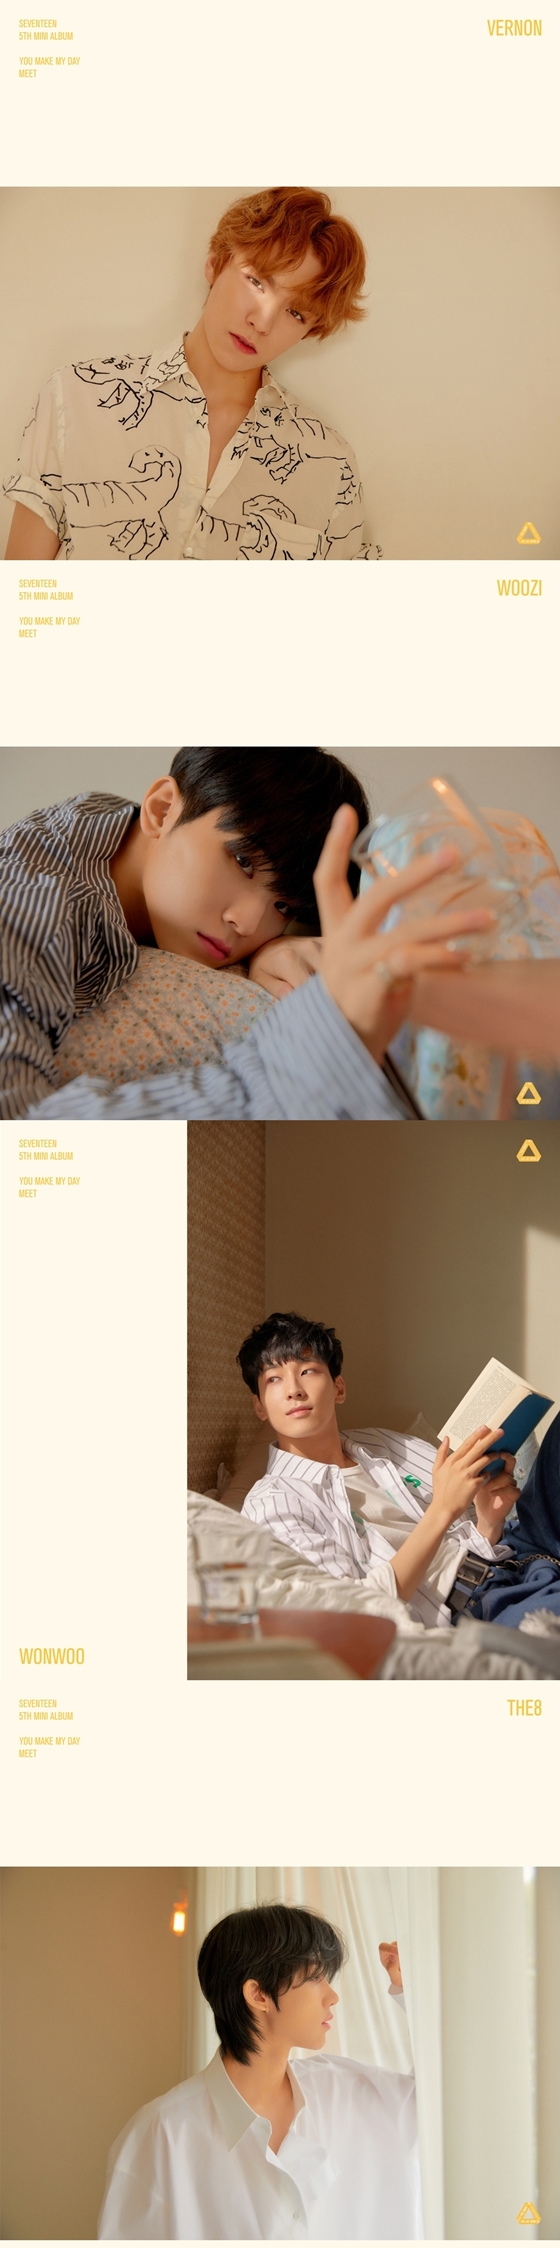 Group Seventeen, who has been collecting topics every day after confirming the release of the mini 5th album, released the title song.Pledice Entertainment, a subsidiary company, first unveiled its first personal official photo with the title song Whats the My My Day of the mini 5th album YOU MAKE MY DAY through the official SNS channel of midnight on the 4th.Seventeens title song Whats wrong, which was released with official photo, is said to be a song that captures their more sophisticated and upgraded charm than the refreshment that Seventeen, the representative of the soft stone, has emphasized.Also released together with this MEET ver.The official photo attracted attention by the members of the Seventeen members who showed different charms of 13 colors in a space where the sunshine came in and the warm color was felt.First, Vernon, Uji, and Wonwoo boasted a more perfect visual with a natural atmosphere and a gentle eye, as well as a more mature atmosphere with light.Finally, Dino, Kim Mingyu, Jun, and Hoshi have attracted a variety of charms in a natural atmosphere, including charismatic appearances and cute appearances. Yoon Jeonghan, Joshua, Seung Kwan, and Escuops have stared at the front in each place with a quiet and languid feeling, creating a warm and lyrical atmosphere.On the other hand, Seventeen will release the entire song soundtrack of the mini 5th album YOU MAKE MY DAY (Y Make My Day) through various online soundtrack sites at 6 pm on the 16th.Photo: Pledis Entertainment